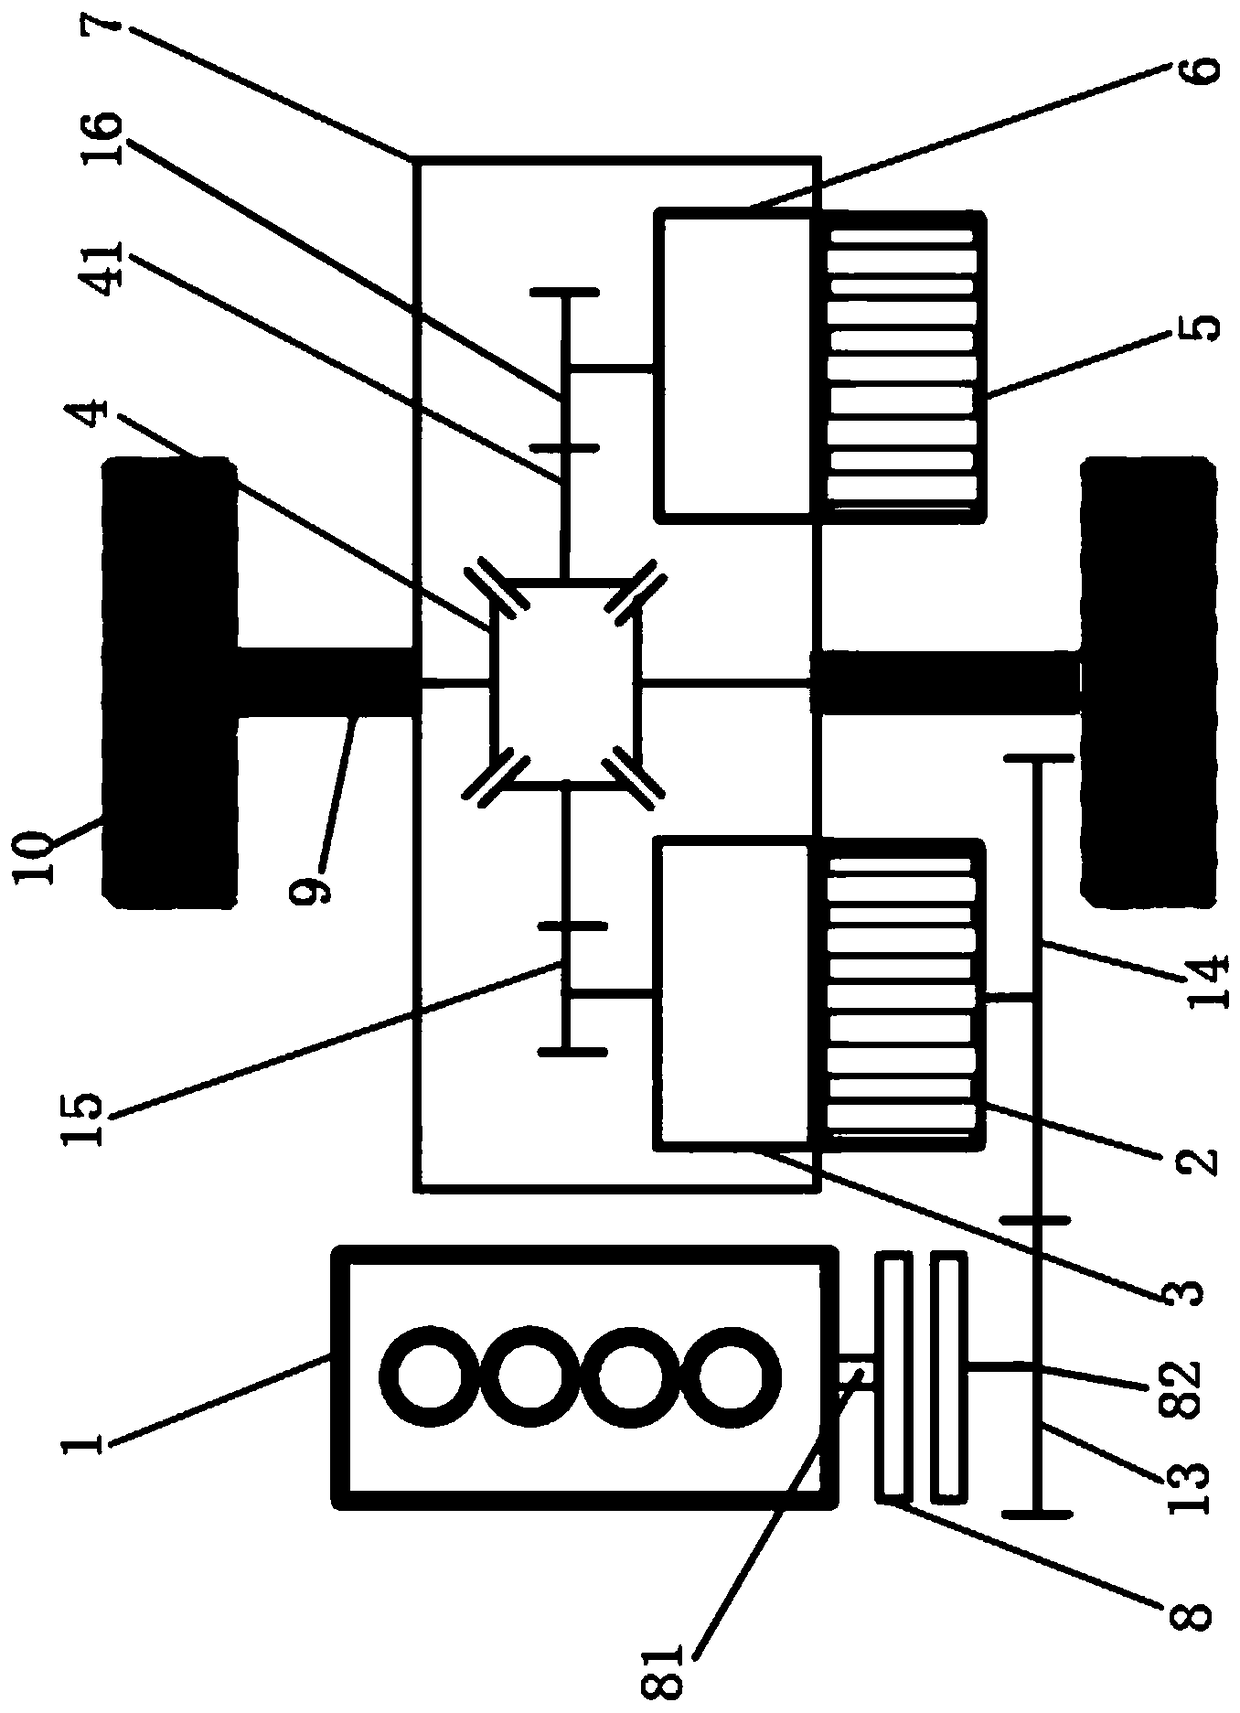 Hybrid power coupled axle based on two gearboxes